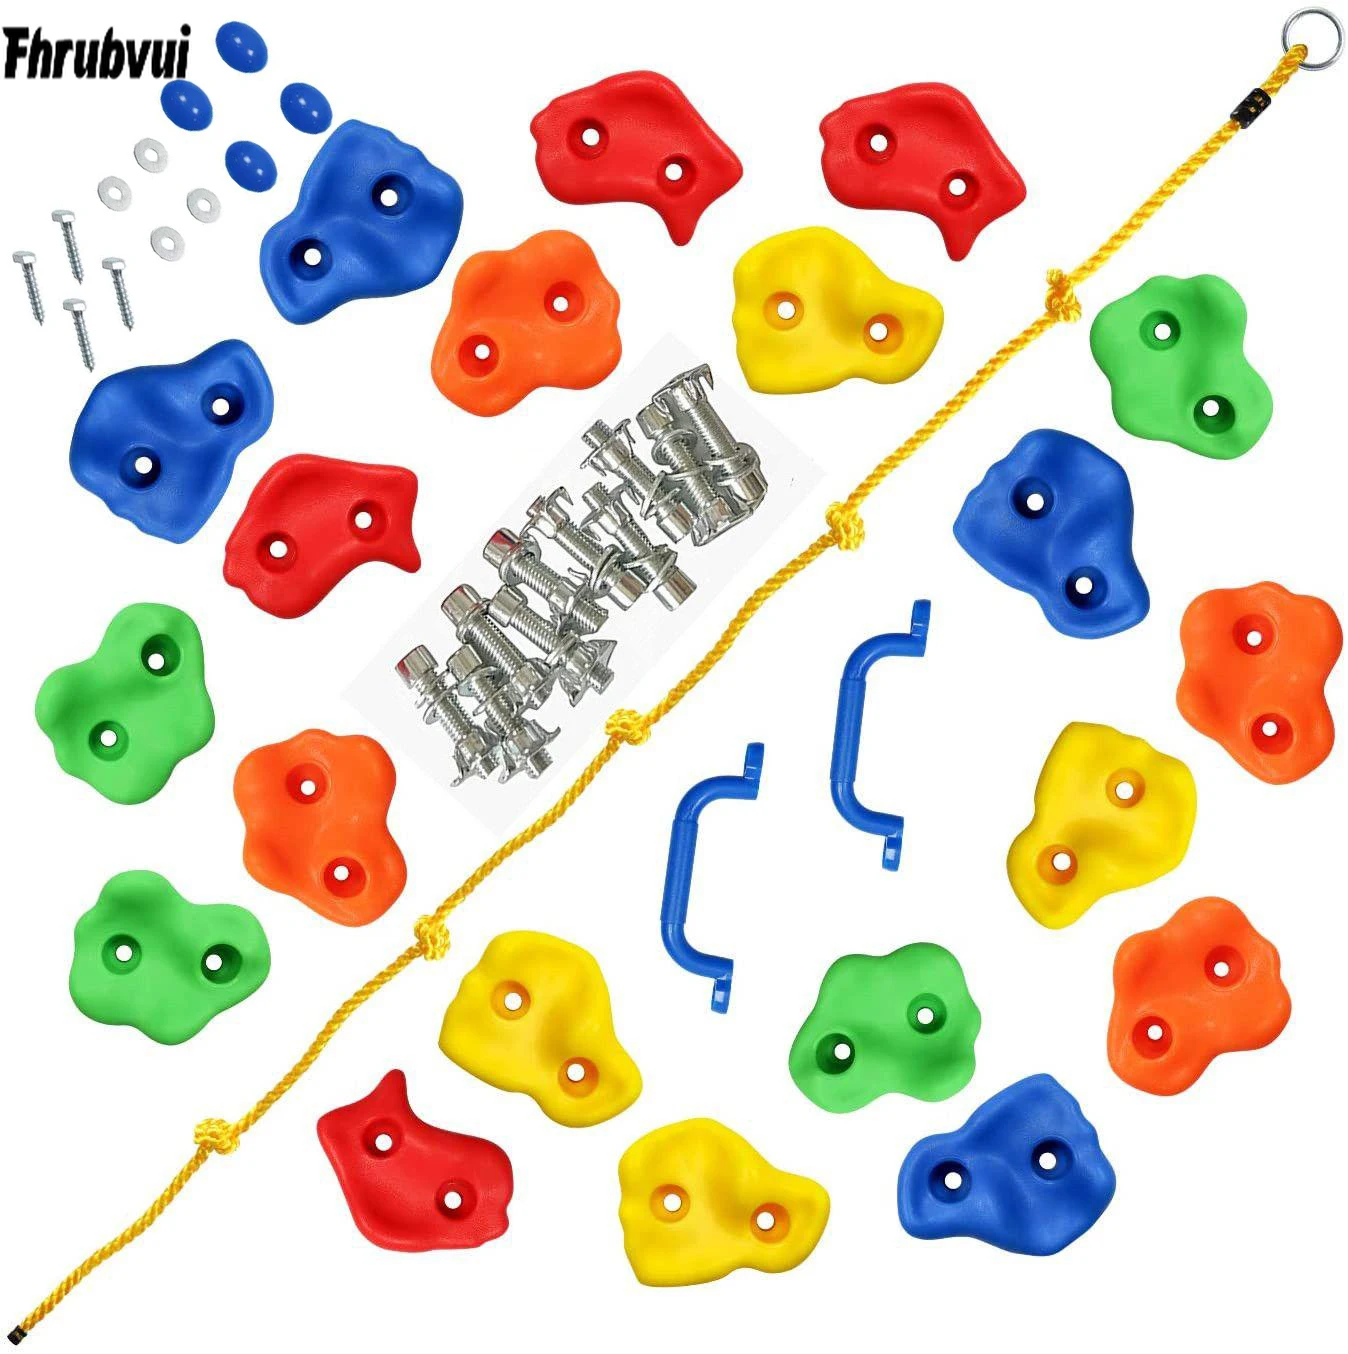 DIY Rock Climbing Holds for Kids - Rock Wall Holds of 20pc Climbing Holds, 2pc Handles & 1pc 8ft Knotted Climbing Rope